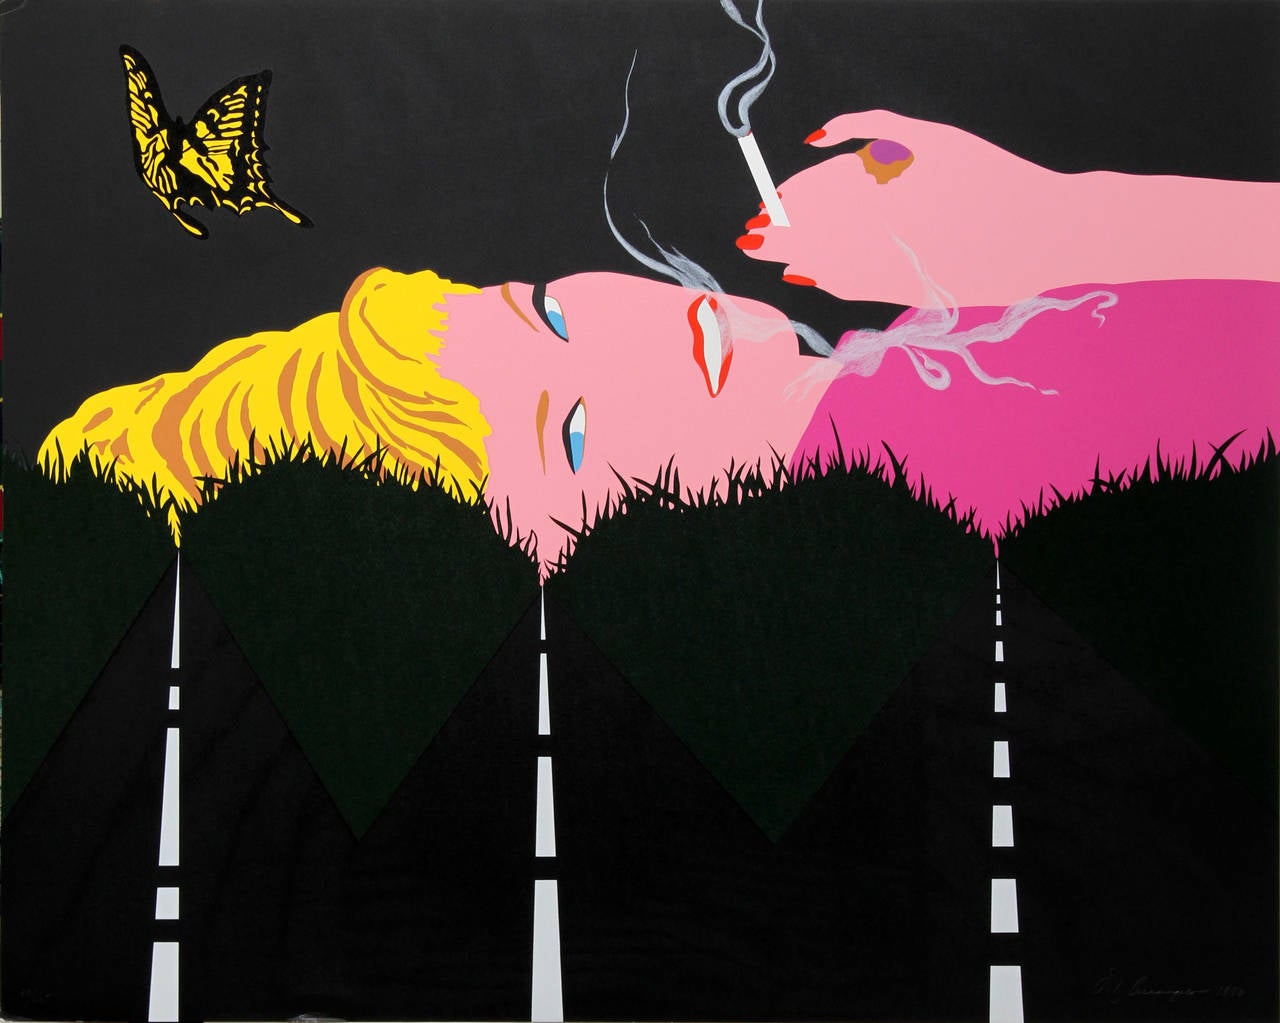 Artist: Allan D'Arcangelo, American (1930 - 1998)
Title: Smoking Blonde
Year: 1990
Medium: Serigraph, signed and numbered in pencil
Edition: 65
Size: 37.5 x 47 in. (95.25 x 119.38 cm)